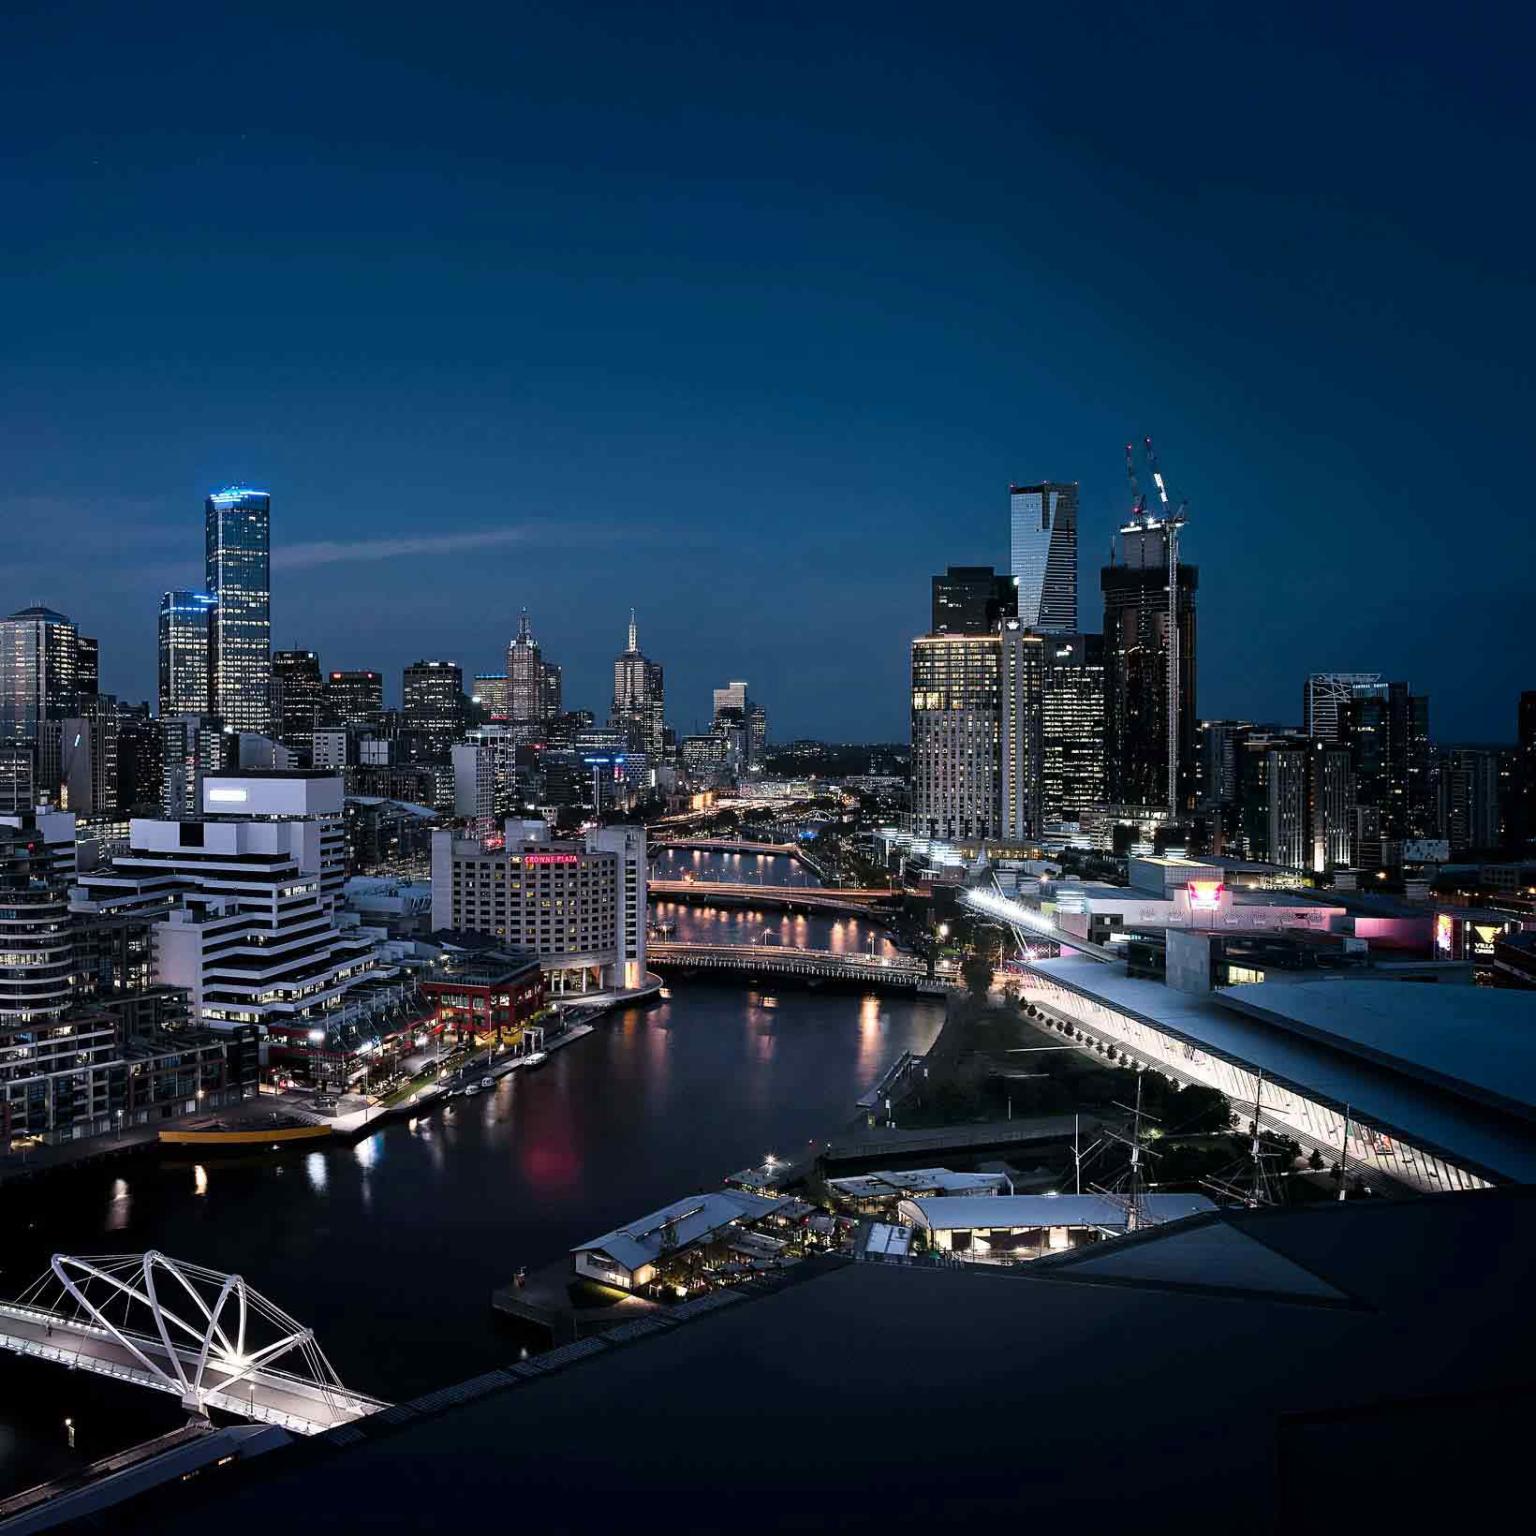 Night time aerial shot of the city with the Melbourne Convention and Exhibition Centre and Yarra River in the foreground. 